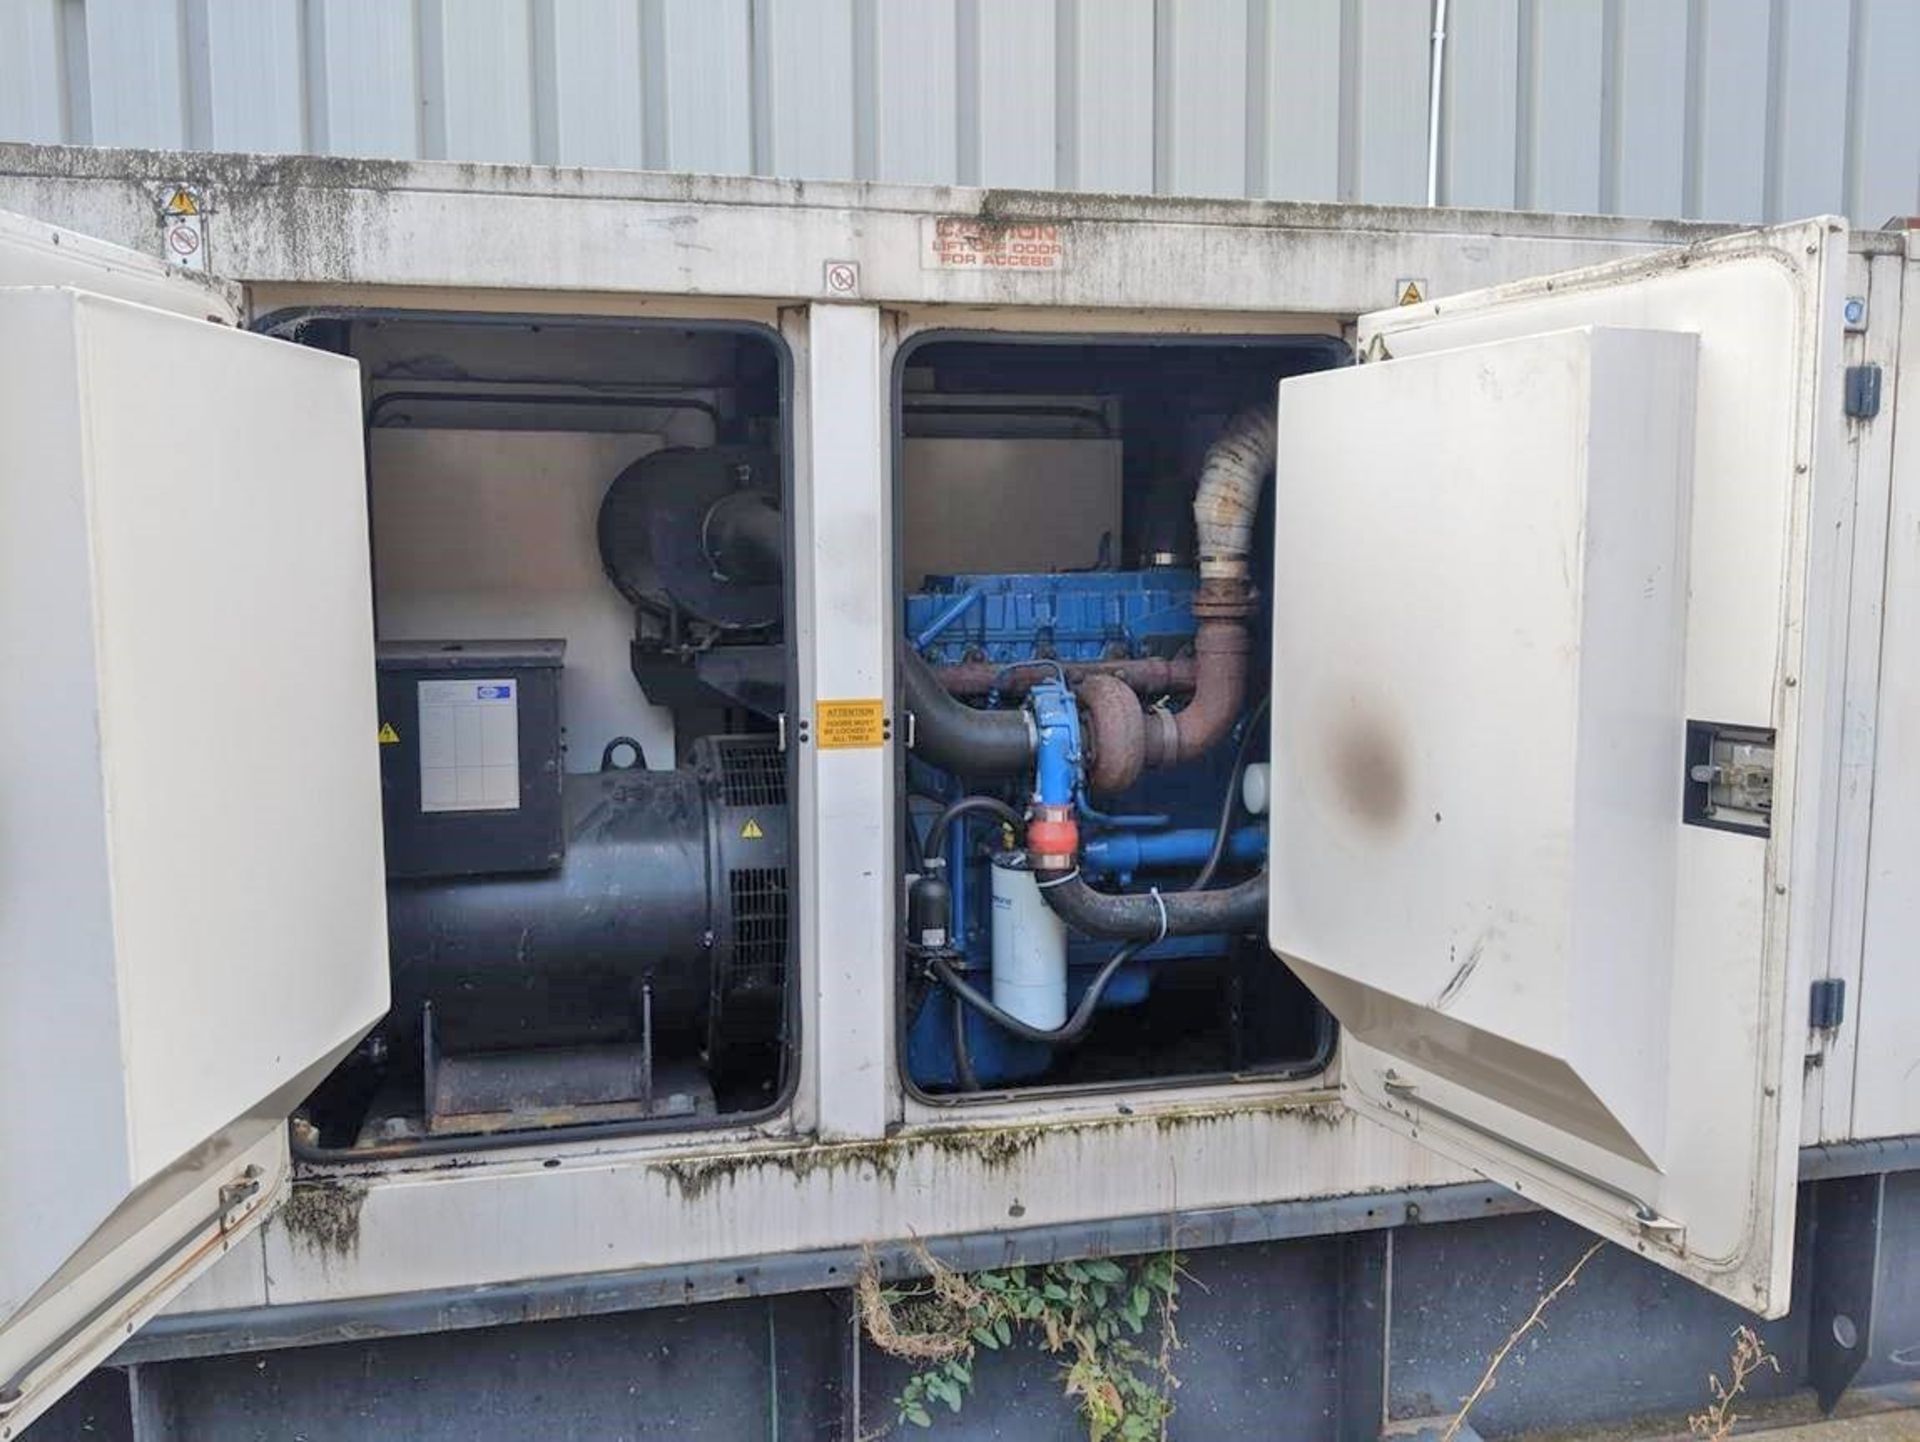 FG Wilson XD 250 P1 Generator, 250kva, 9945 hours, rated voltage 415volts/240volts, year 2004, - Image 2 of 5